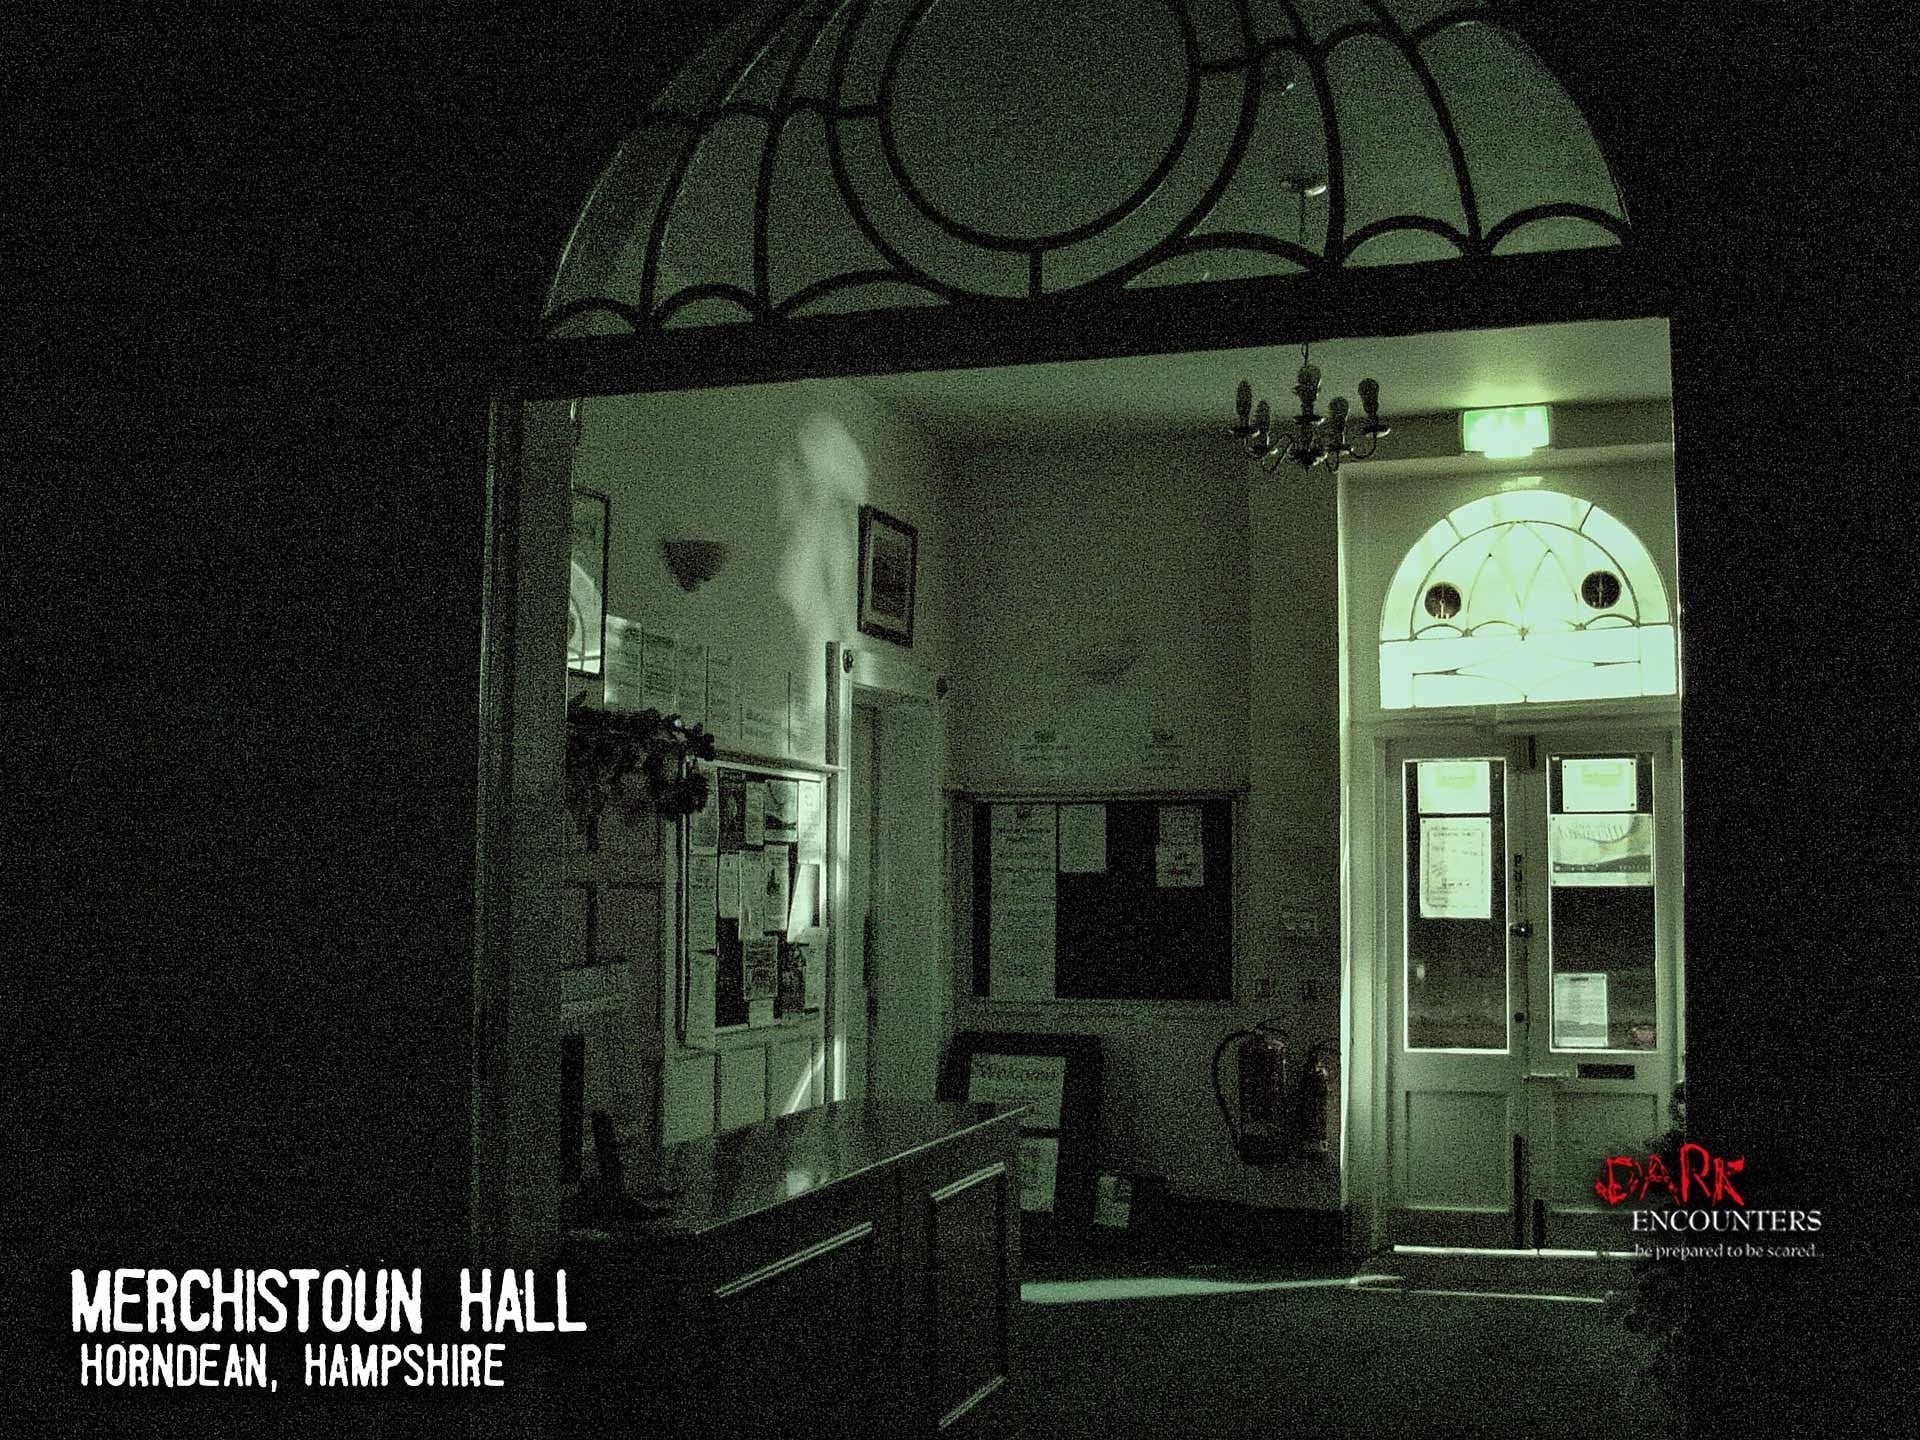 The inside view of Merchistoun Hall, a haunted location